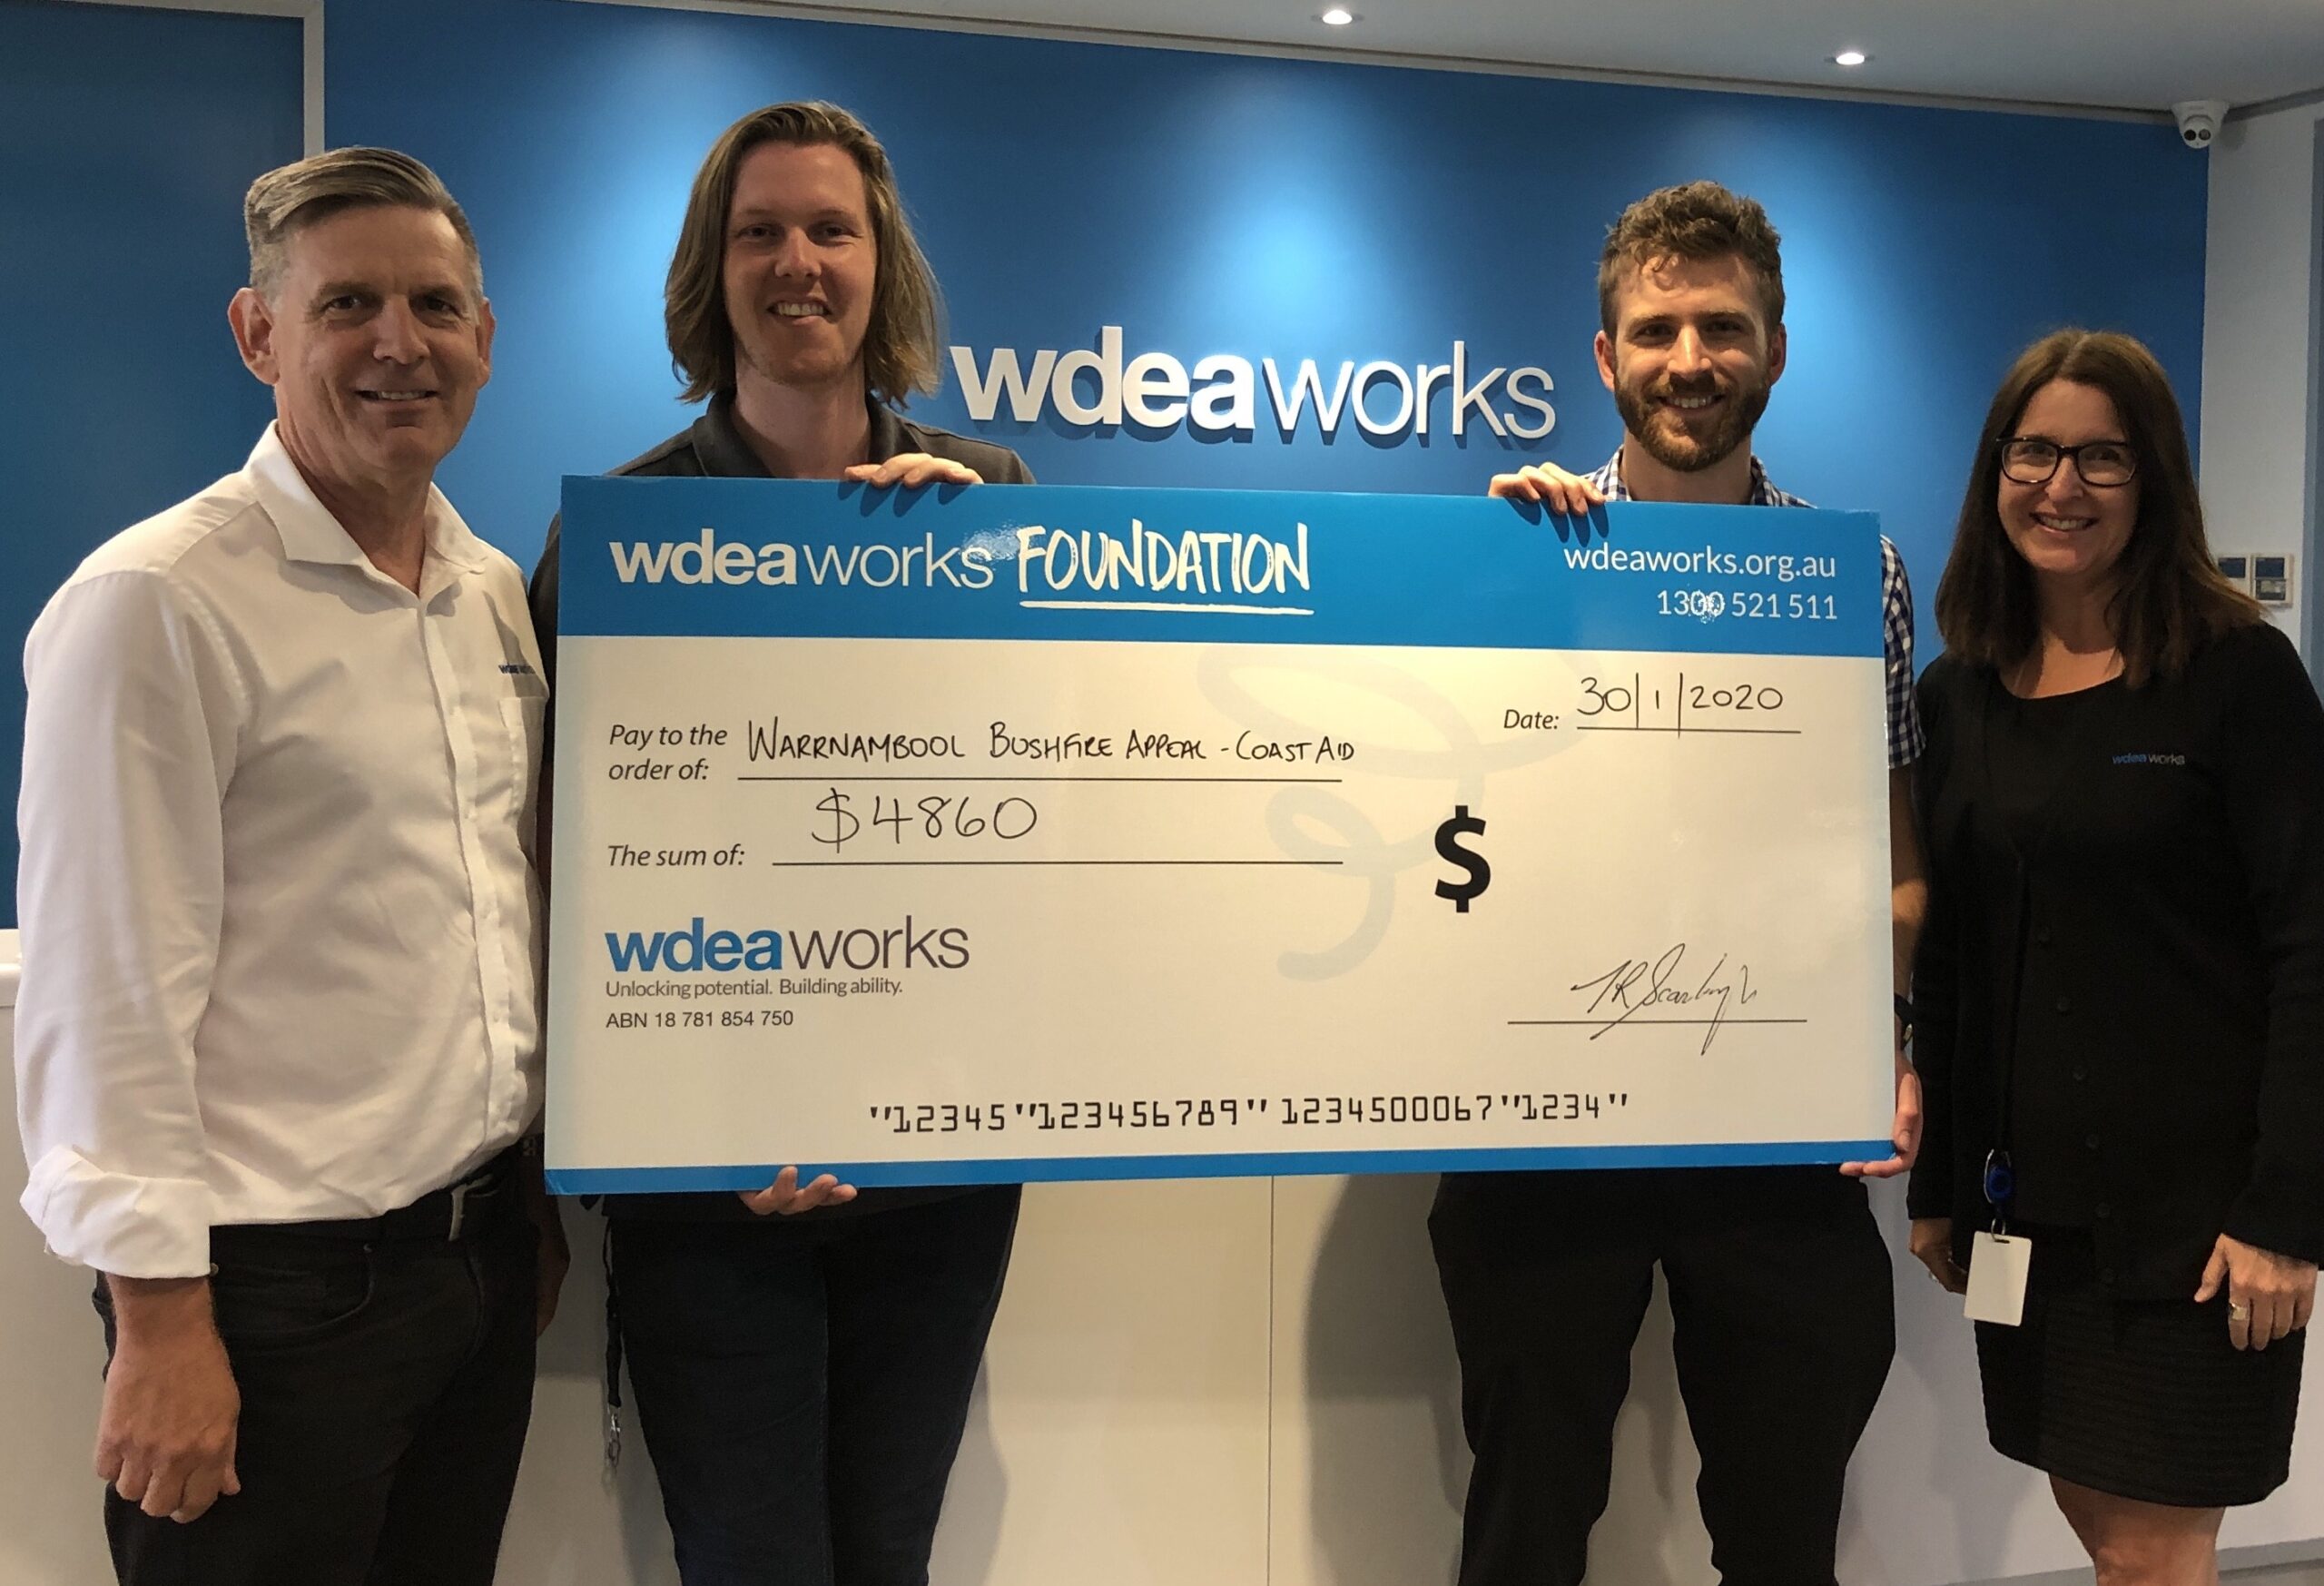 WDEA Works Bands Together for Bushfire Victims